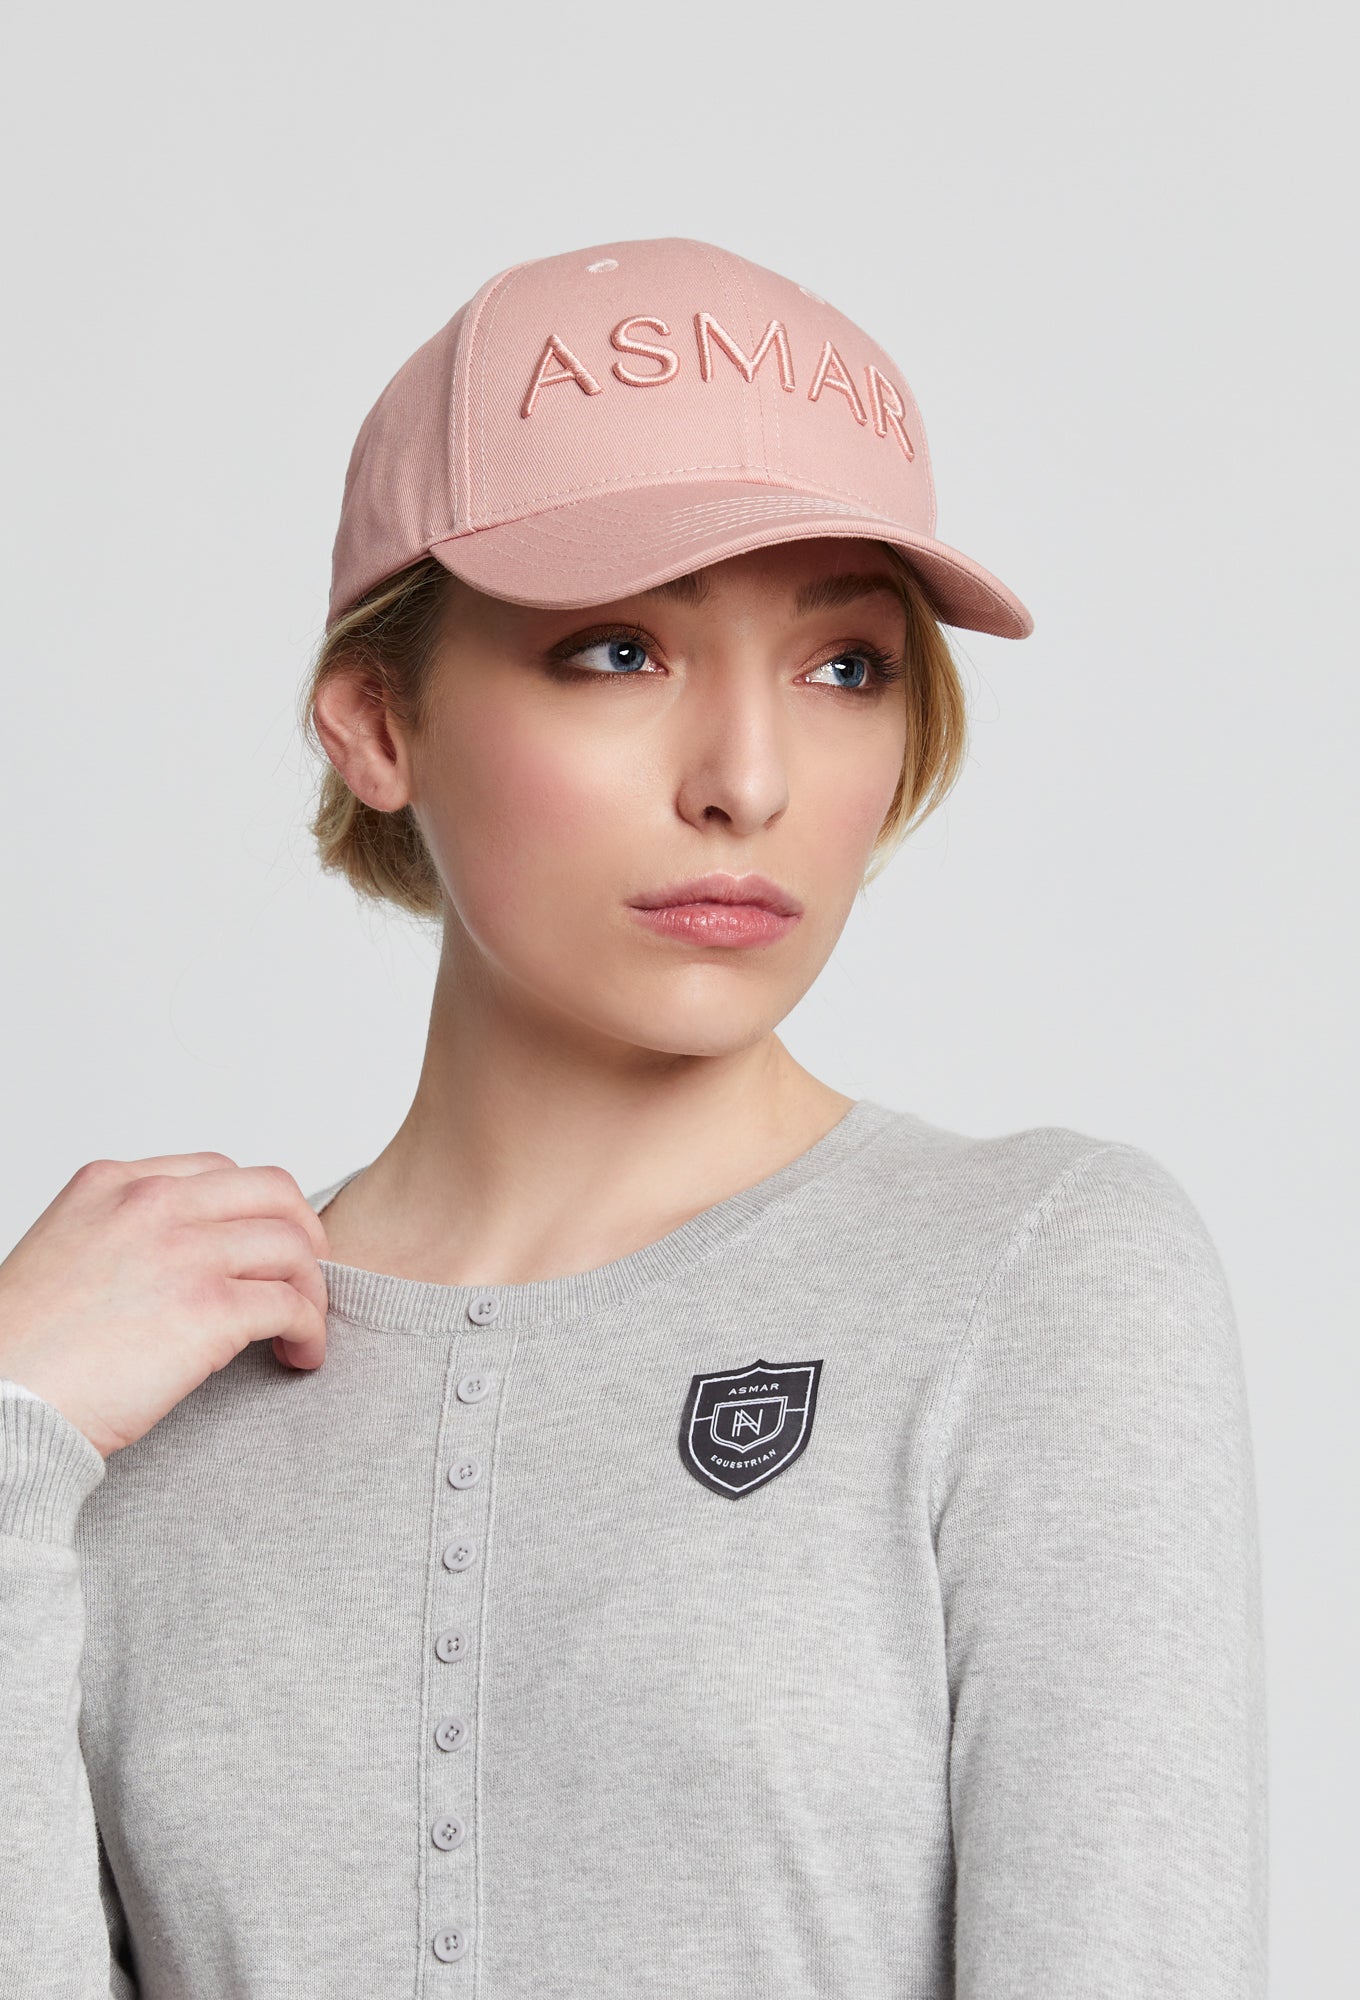 Woman wearing a pink baseball style cap with the word &quot;Asmar&quot; written on the front.